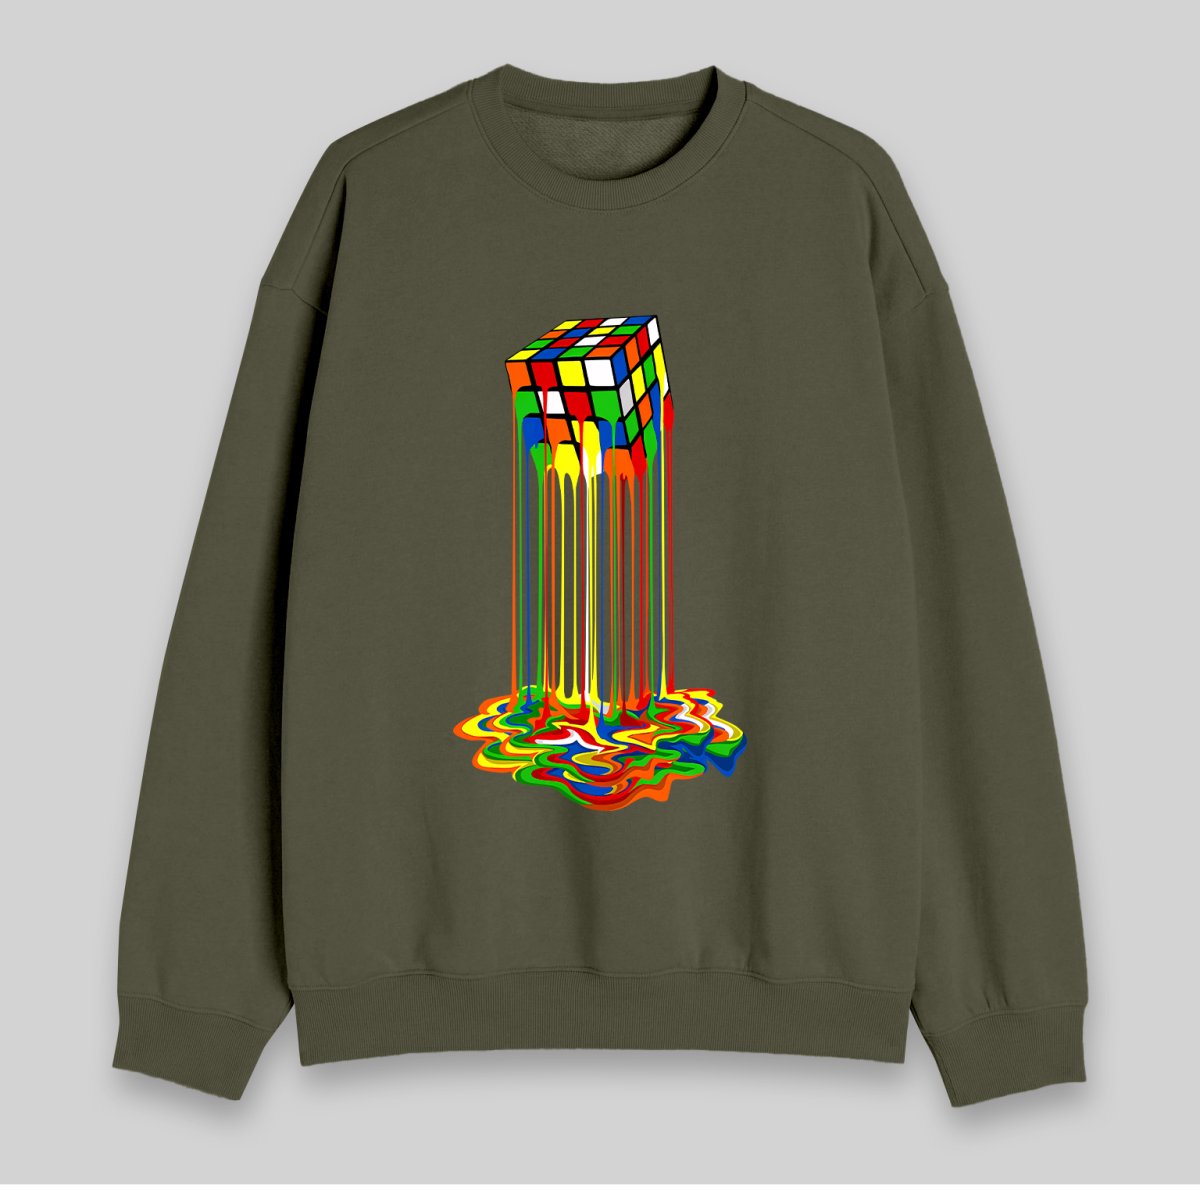 Rainbow Abstraction Melted Rubix Cube Sweatshirt - Geeksoutfit